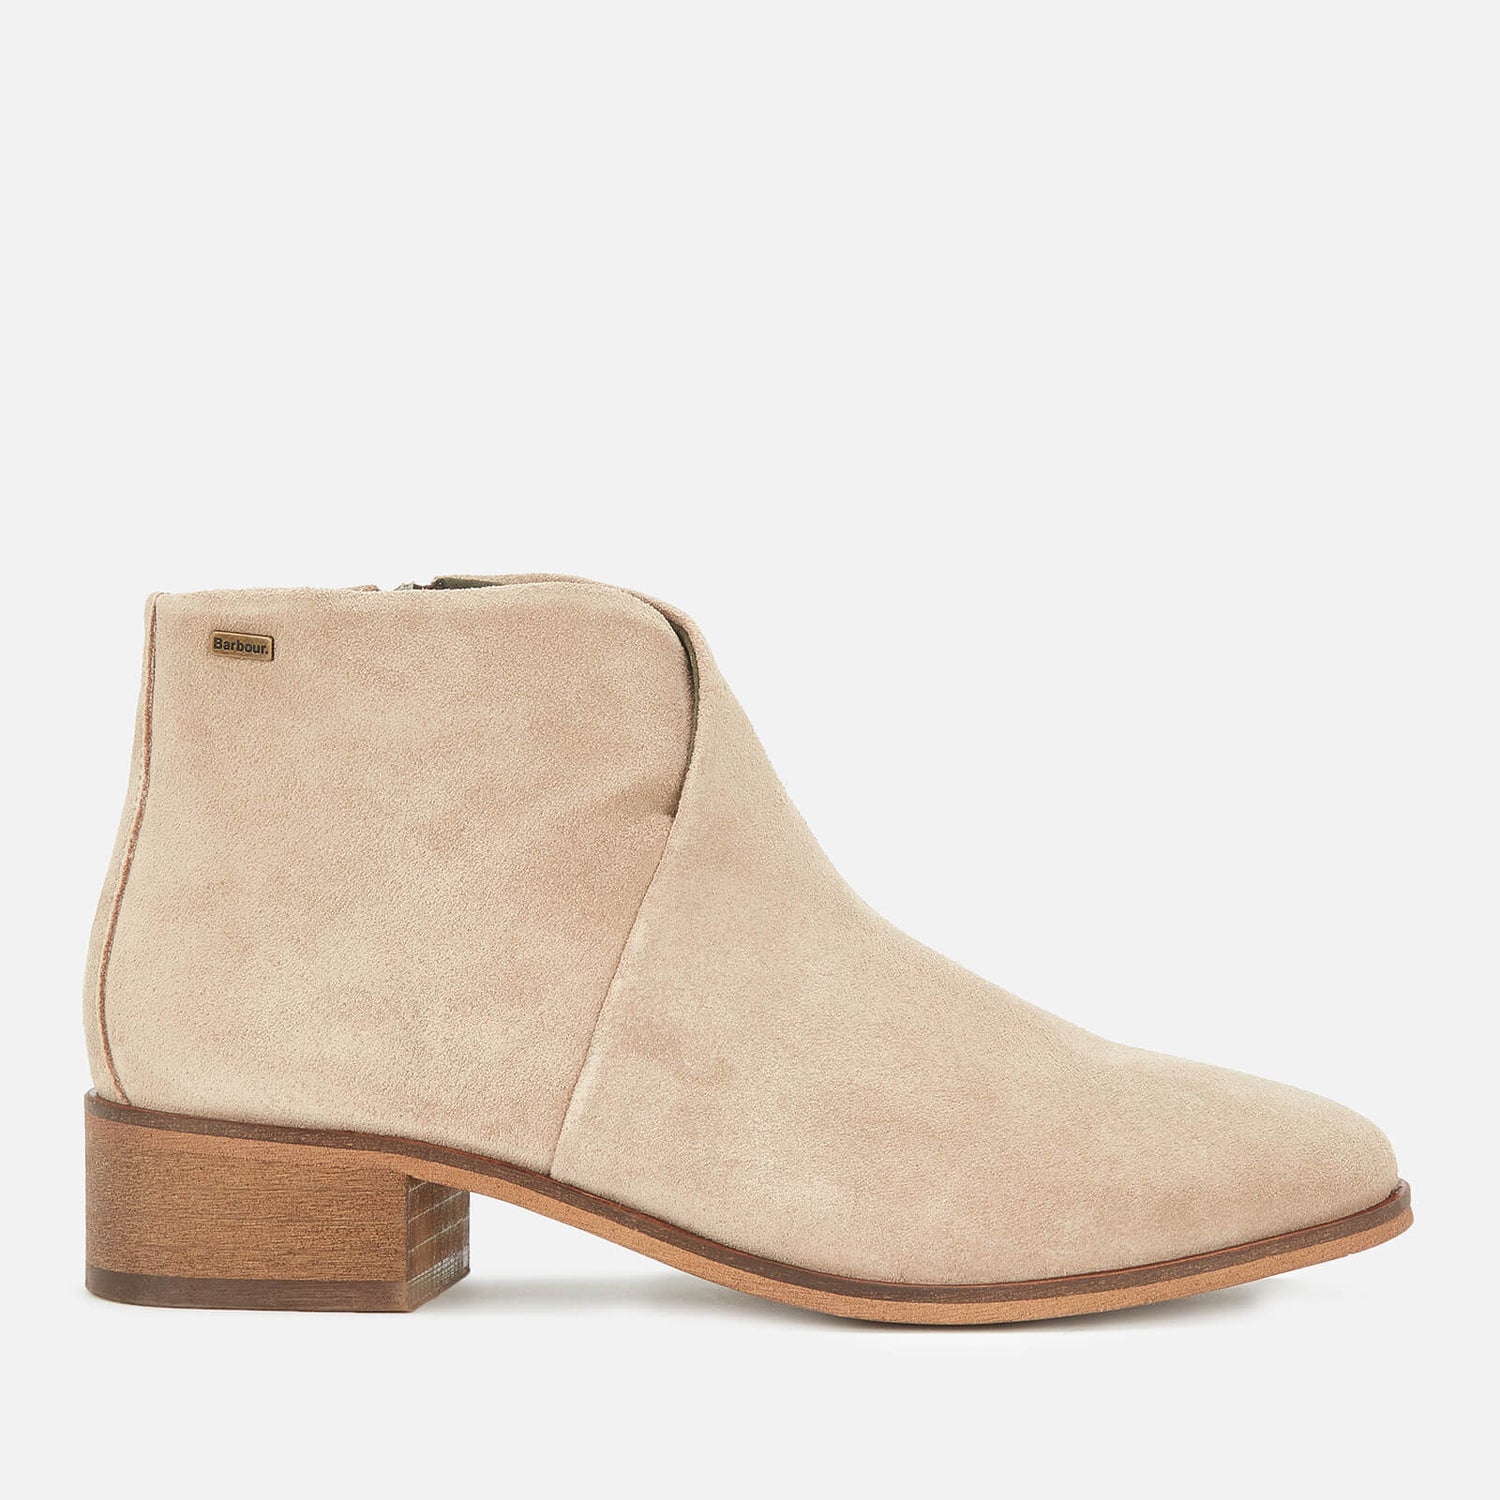 Barbour Women's Caryn Suede Heeled Ankle Boots - Sand